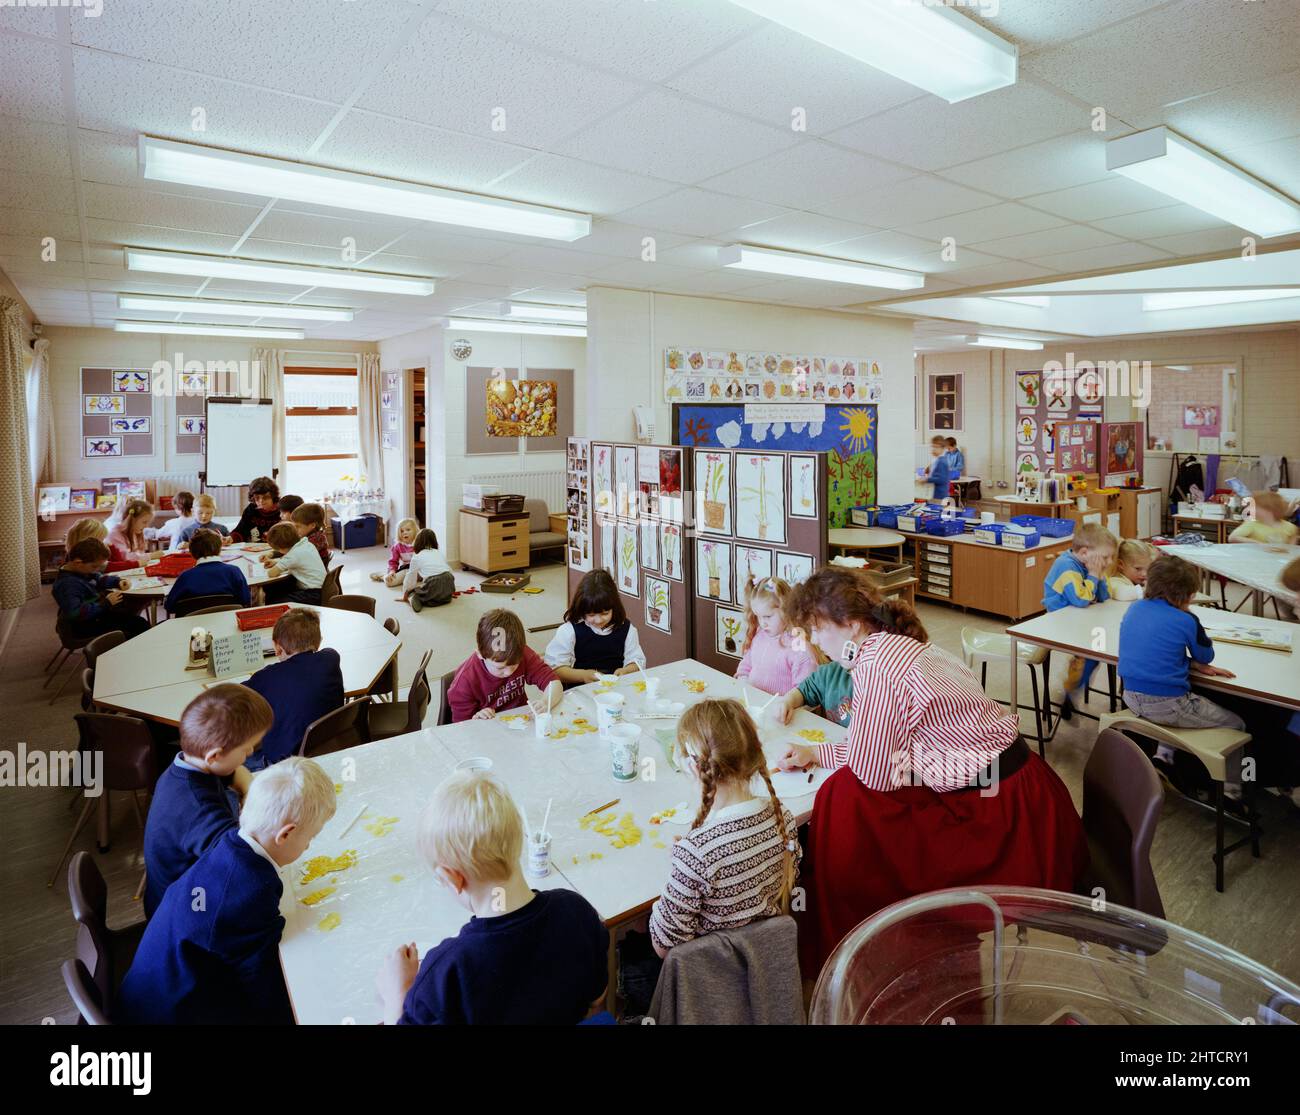 Whingate Primary School, Whingate Road, Leeds, 09/03/1989. Children working at tables in a classroom at Whingate Primary School, Leeds. Laing's Yorkshire Region division built three schools as a combined &#xa3;4m contract for Leeds City Council. Whitecote, Harehills and Whingate primary schools were all built between September 1987 and September 1988. All three were of traditional brick and block construction with hipped tiled roofs. The design followed the same template but Whingate was a mirror image of the other two. Stock Photo